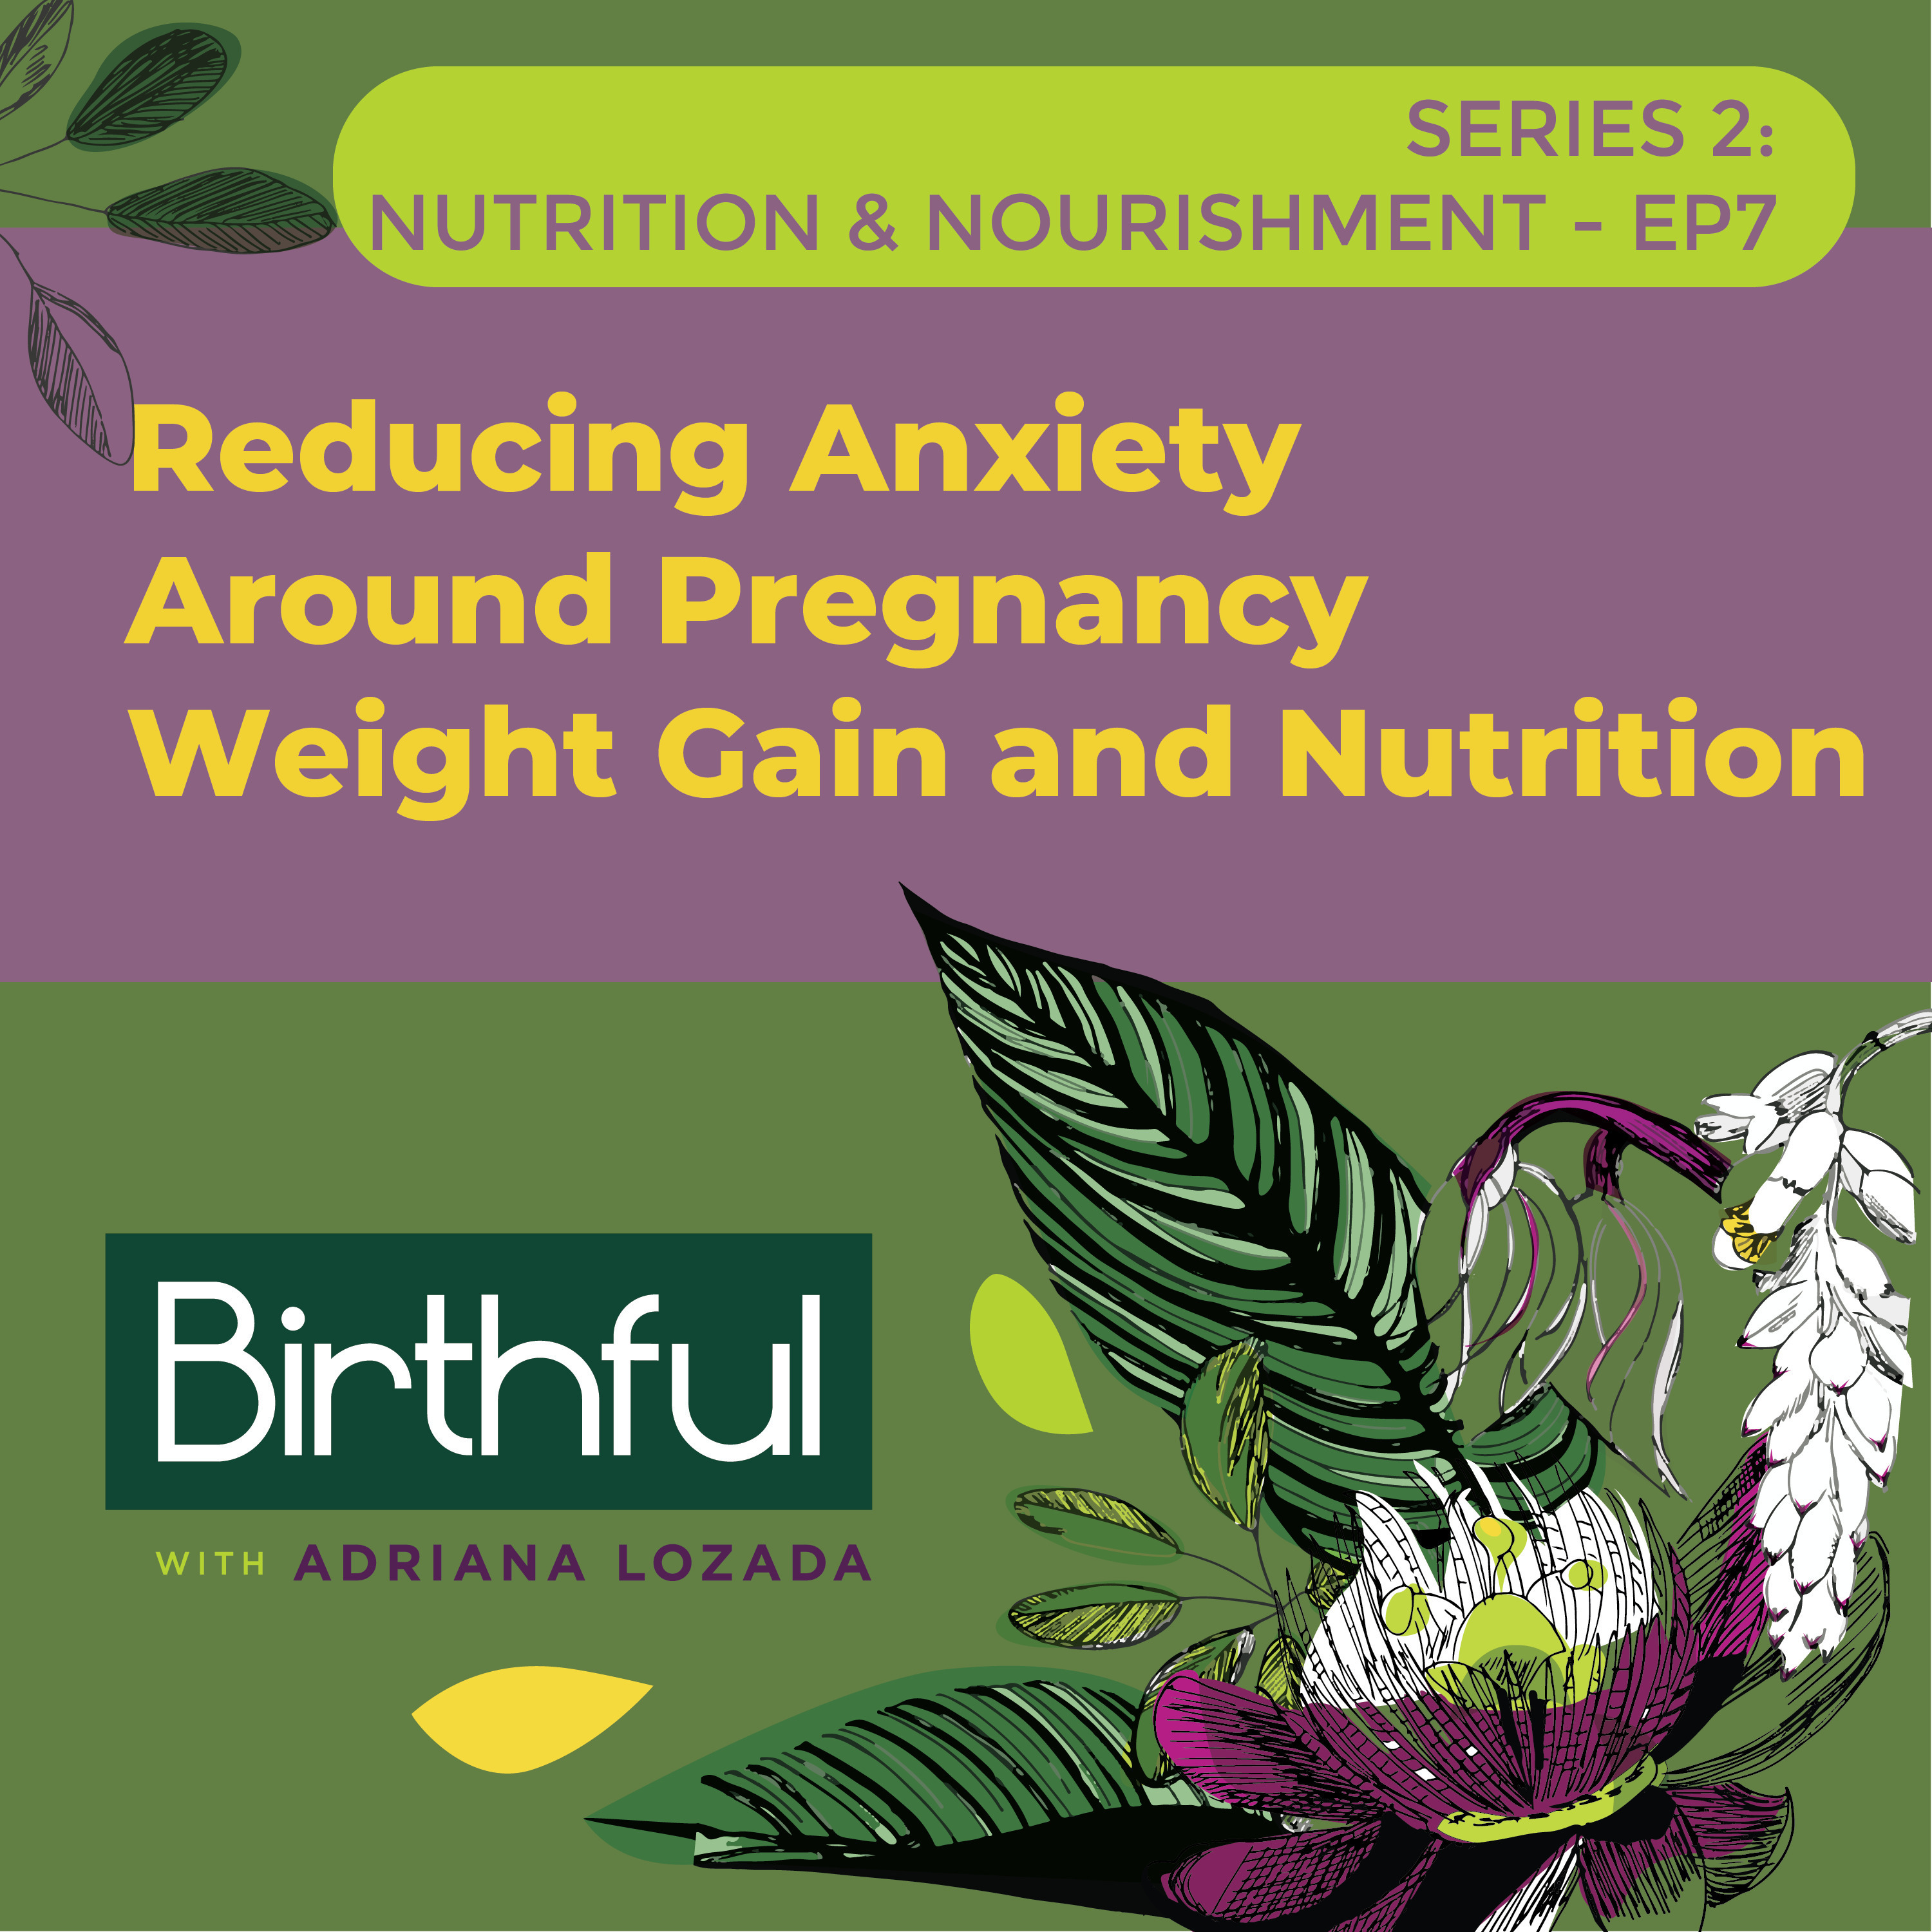 Reducing Anxiety Around Pregnancy Weight Gain and Nutrition